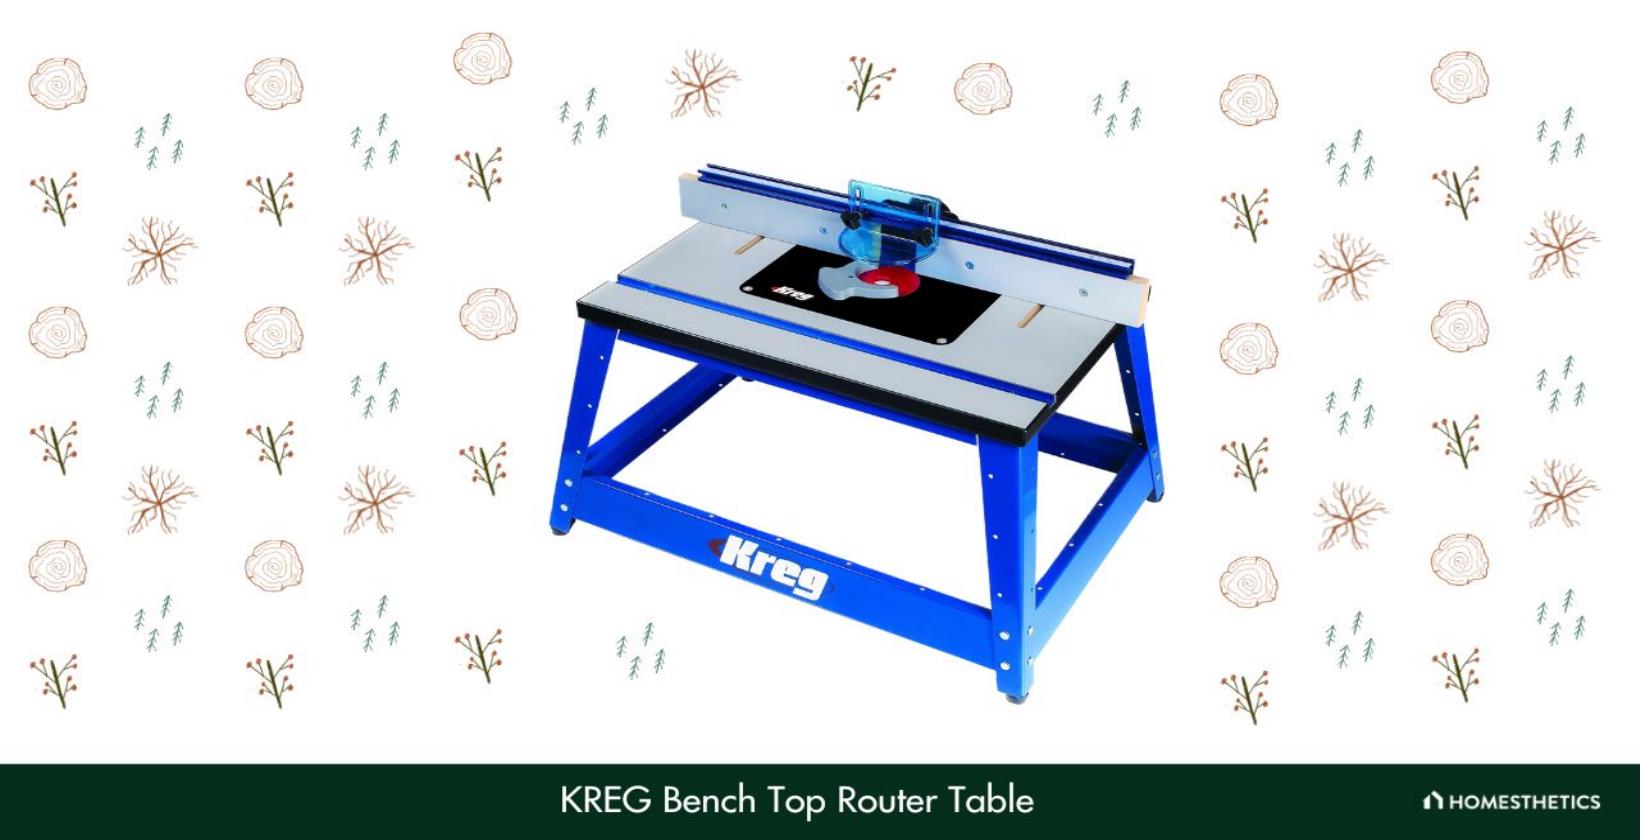 4. KREG Bench Top Router Table